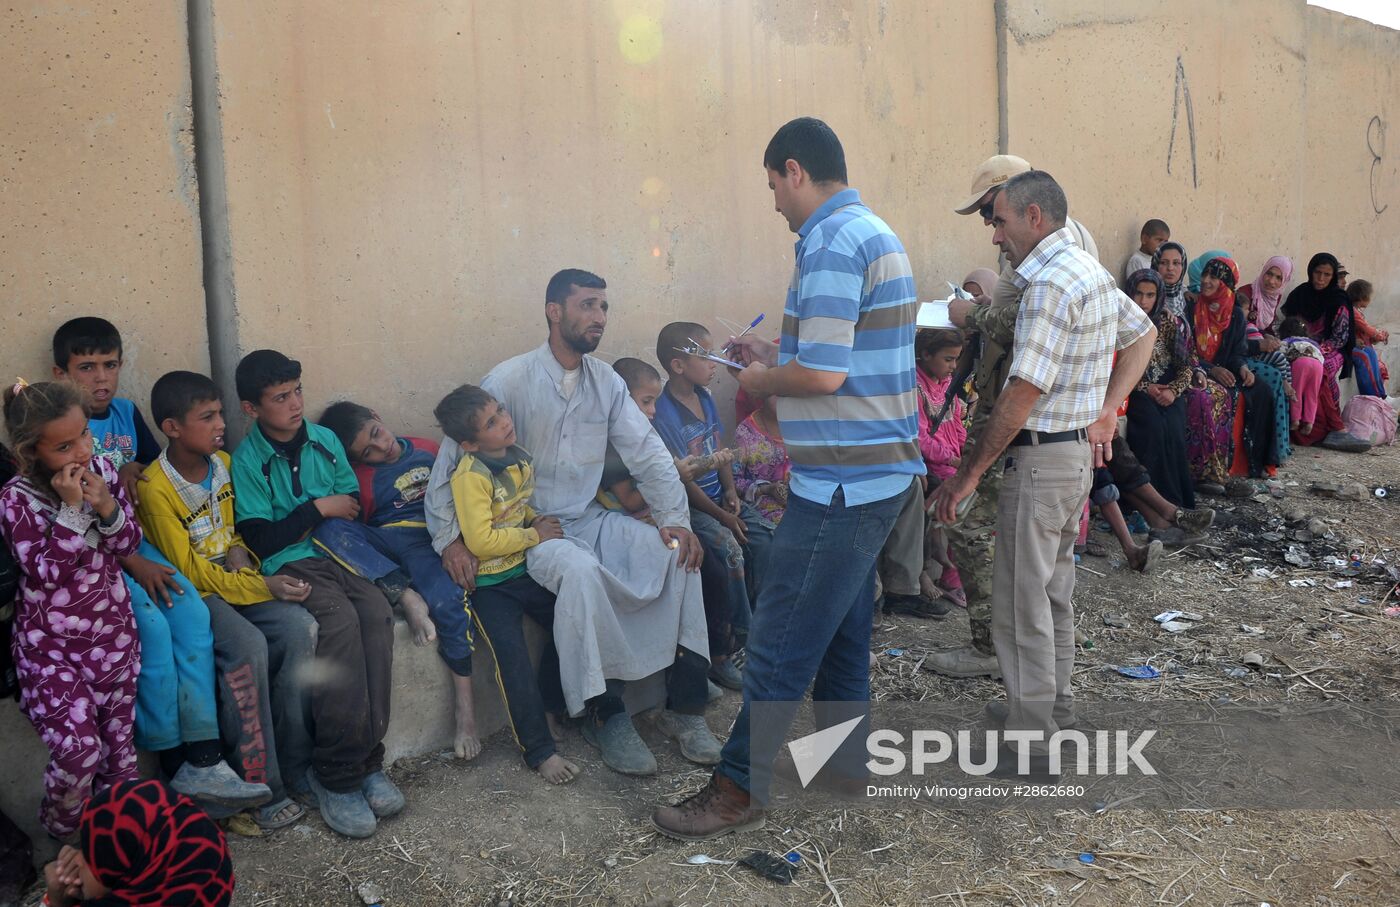 Refugees from ISIS-occupied lands come to Kirkuk in Iraq